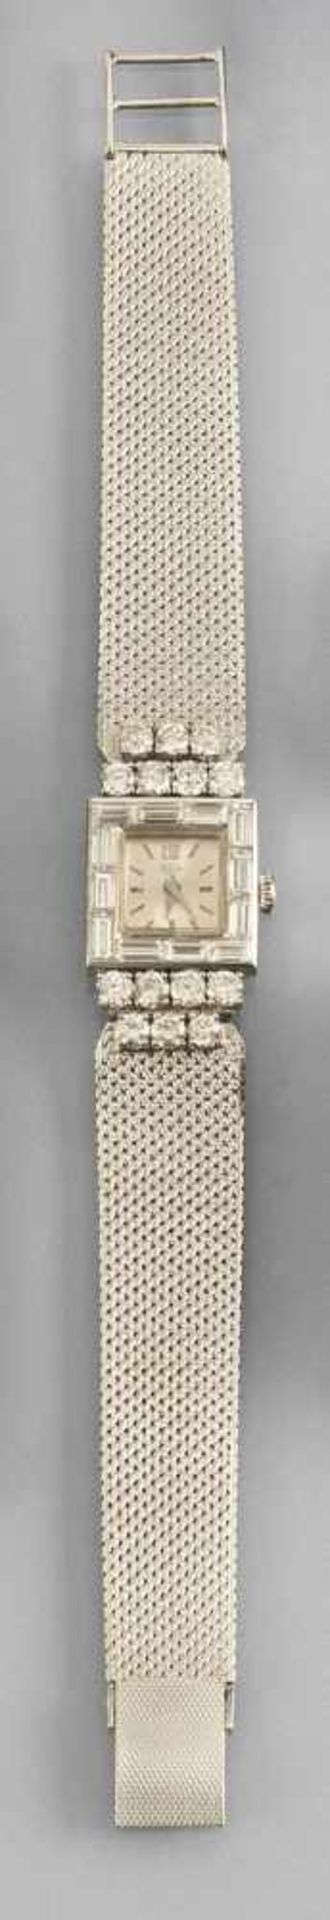 A LADY'S DIAMOND AND GOLD WATCH, RsW, 1970ies. 750 white gold watchcase and bracelet. Set with 14